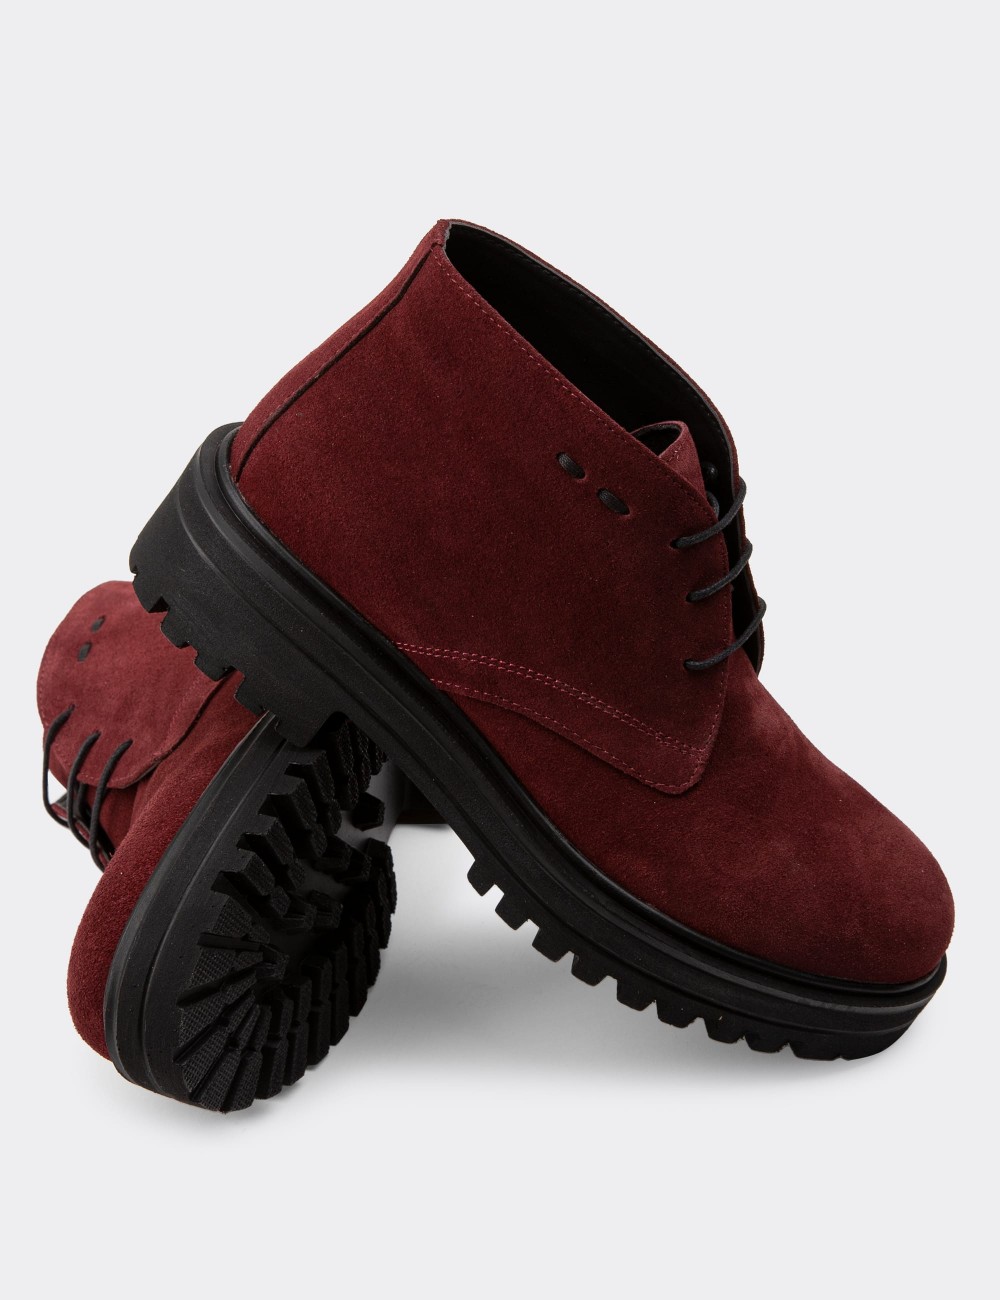 Burgundy Suede Leather Boots - 01847ZBRDE01